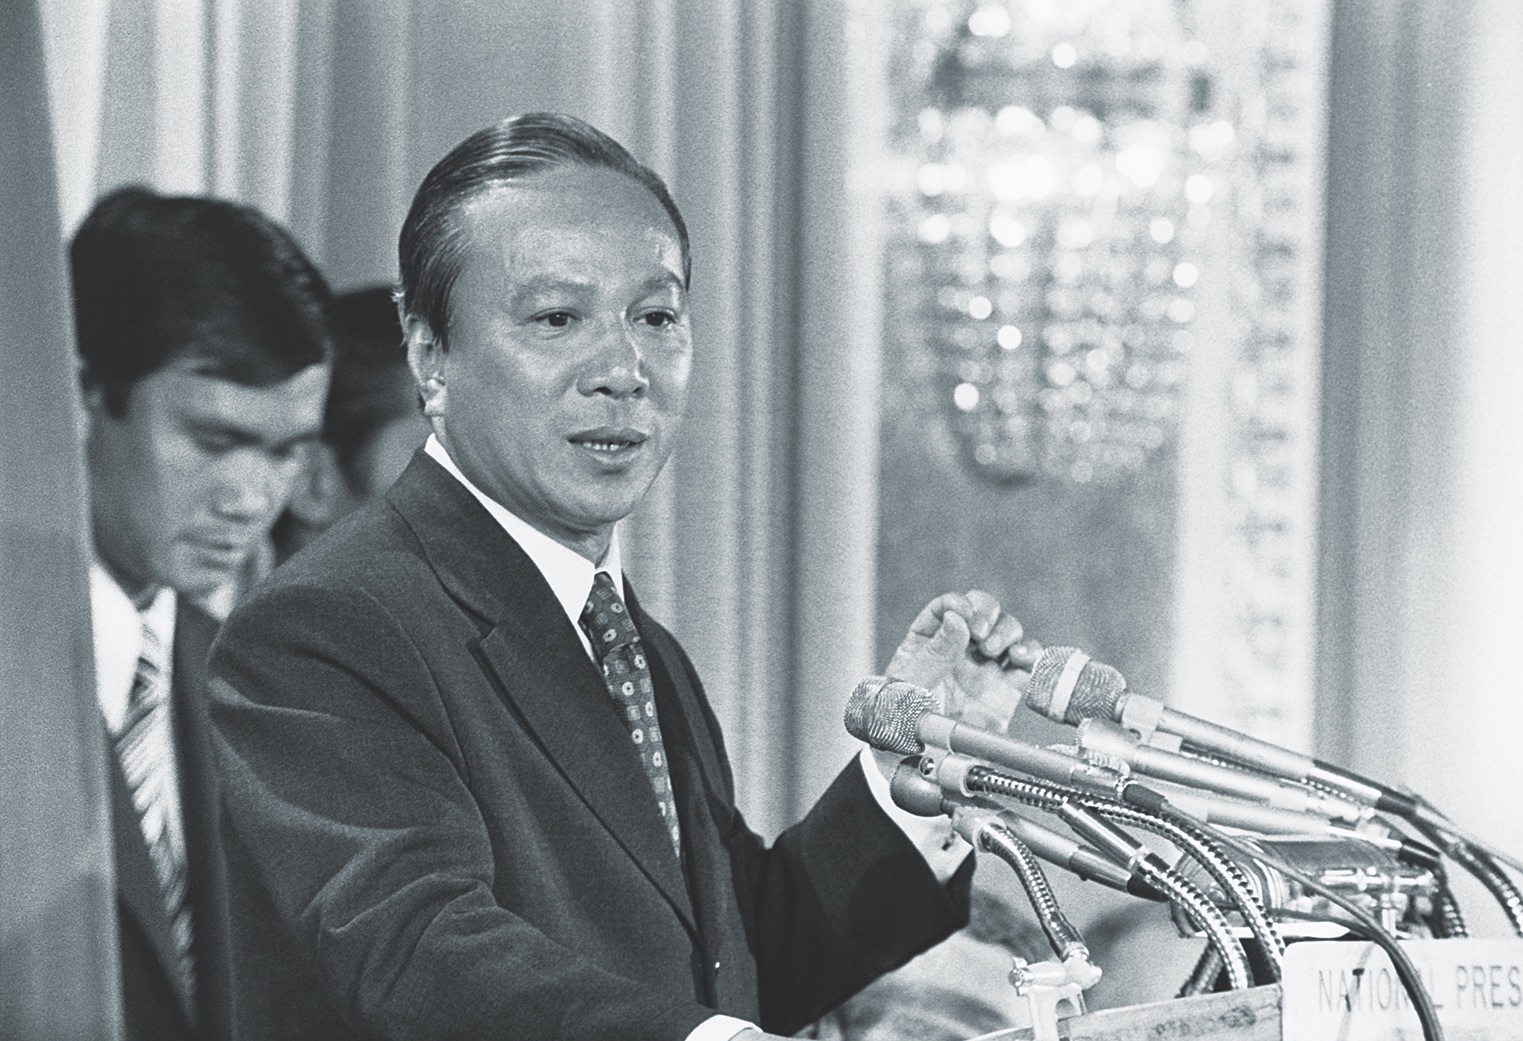 South Vietnamese President Nguyen Van Thieu, here in an undated photo, had praised the defense of Xuan Loc, but just days later, on April 21, he resigned to escape the encroaching enemy. (Corbis via Getty Images)